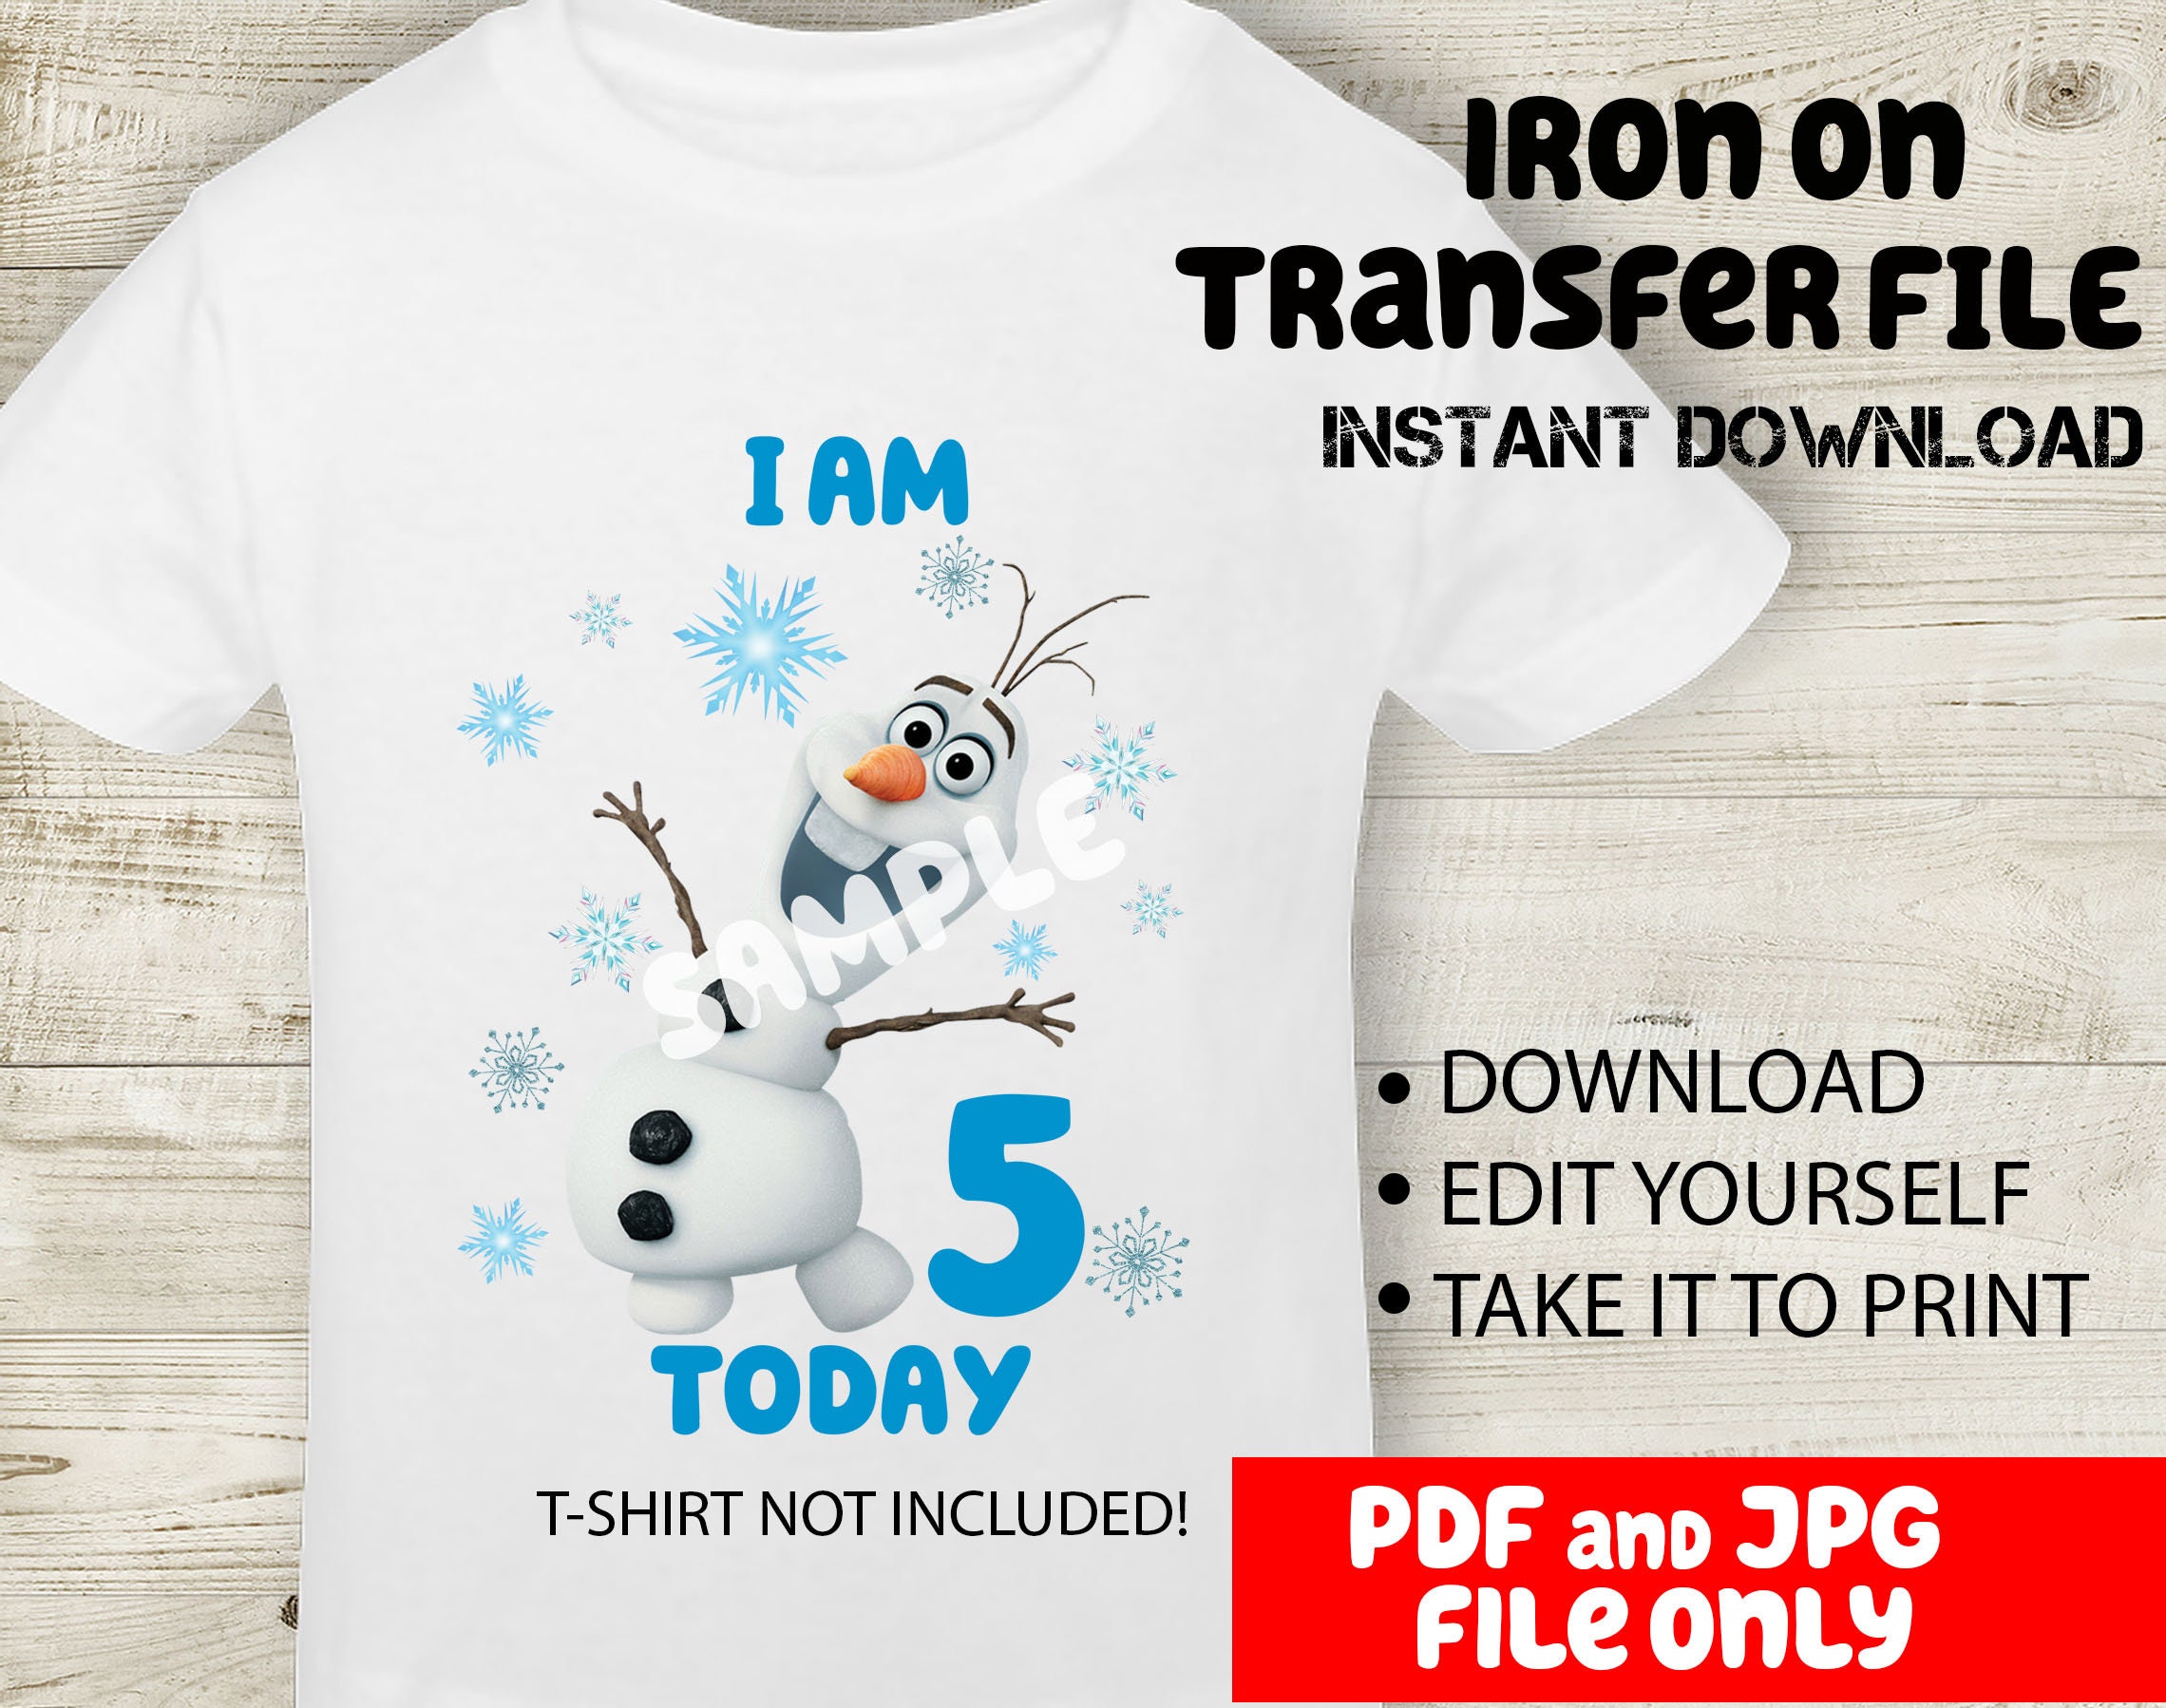 Olaf Frozen on Blue Snowy Background | IMAGE Printable Use as Iron On  T-Shirt Transfer DIY Project | Instant Digital Download